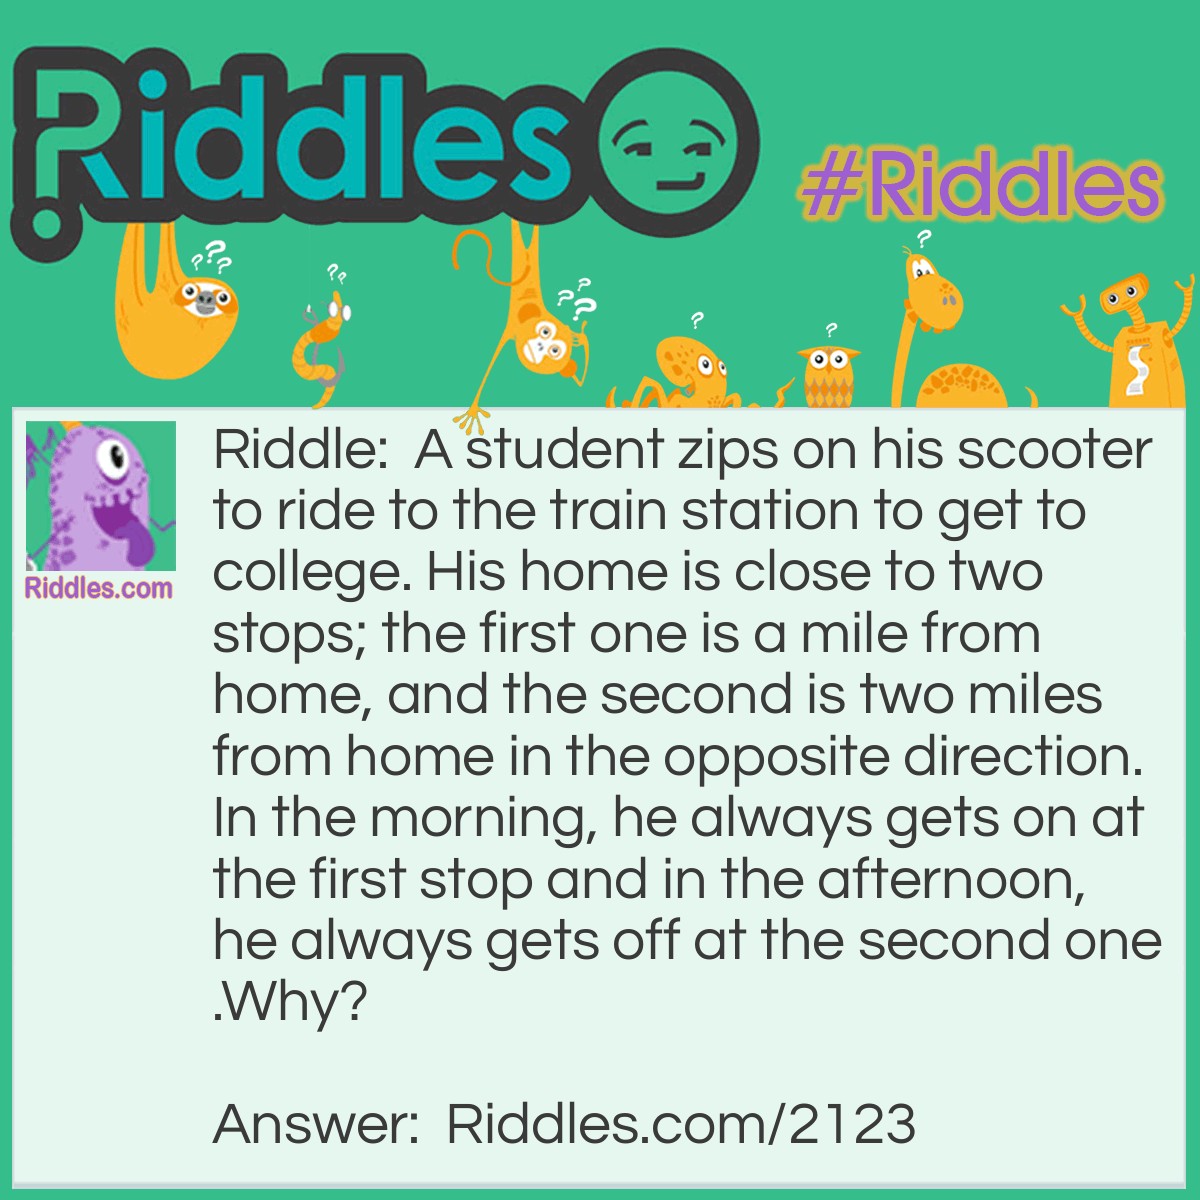 Riddle: A student zips on his scooter to ride to the train station to get to college. His home is close to two stops; the first one is a mile from home, and the second is two miles from home in the opposite direction. In the morning, he always gets on at the first stop and in the afternoon, he always gets off at the second one.
Why? Answer: The sations and his home are on a hill, which allows him to ride down easily on his scooter.